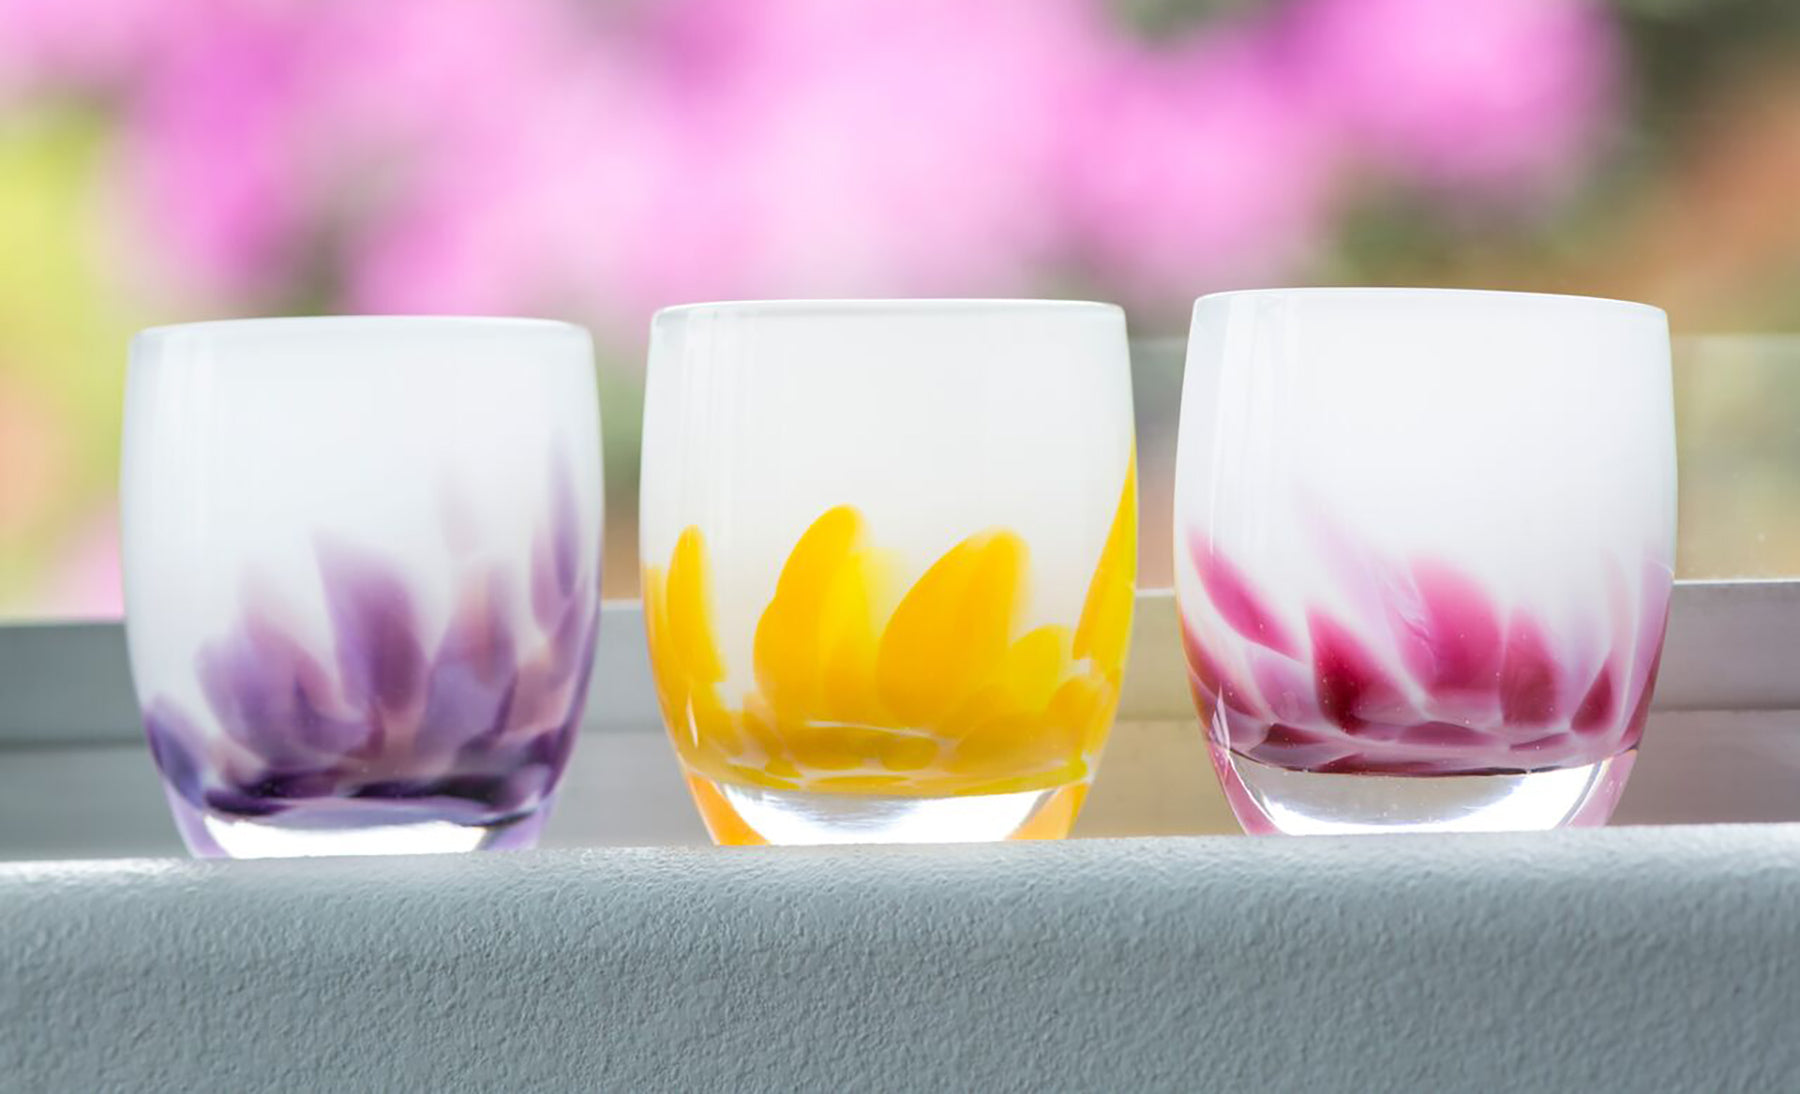 wisteria, buttercup and petal, handblown glass candle holders on a window sil.